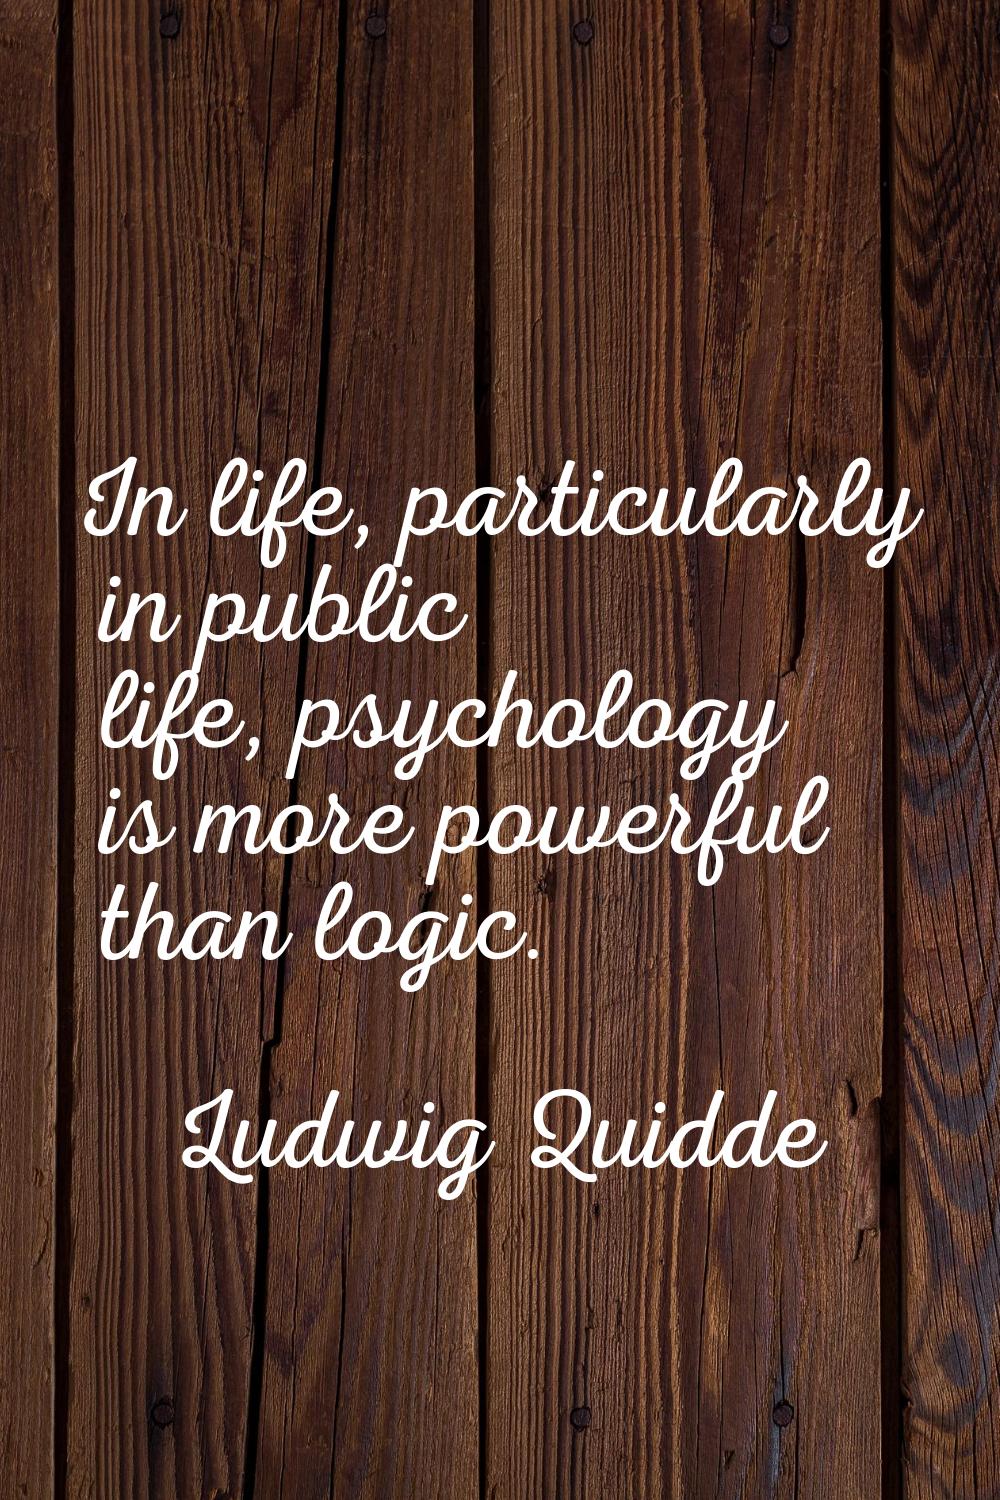 In life, particularly in public life, psychology is more powerful than logic.